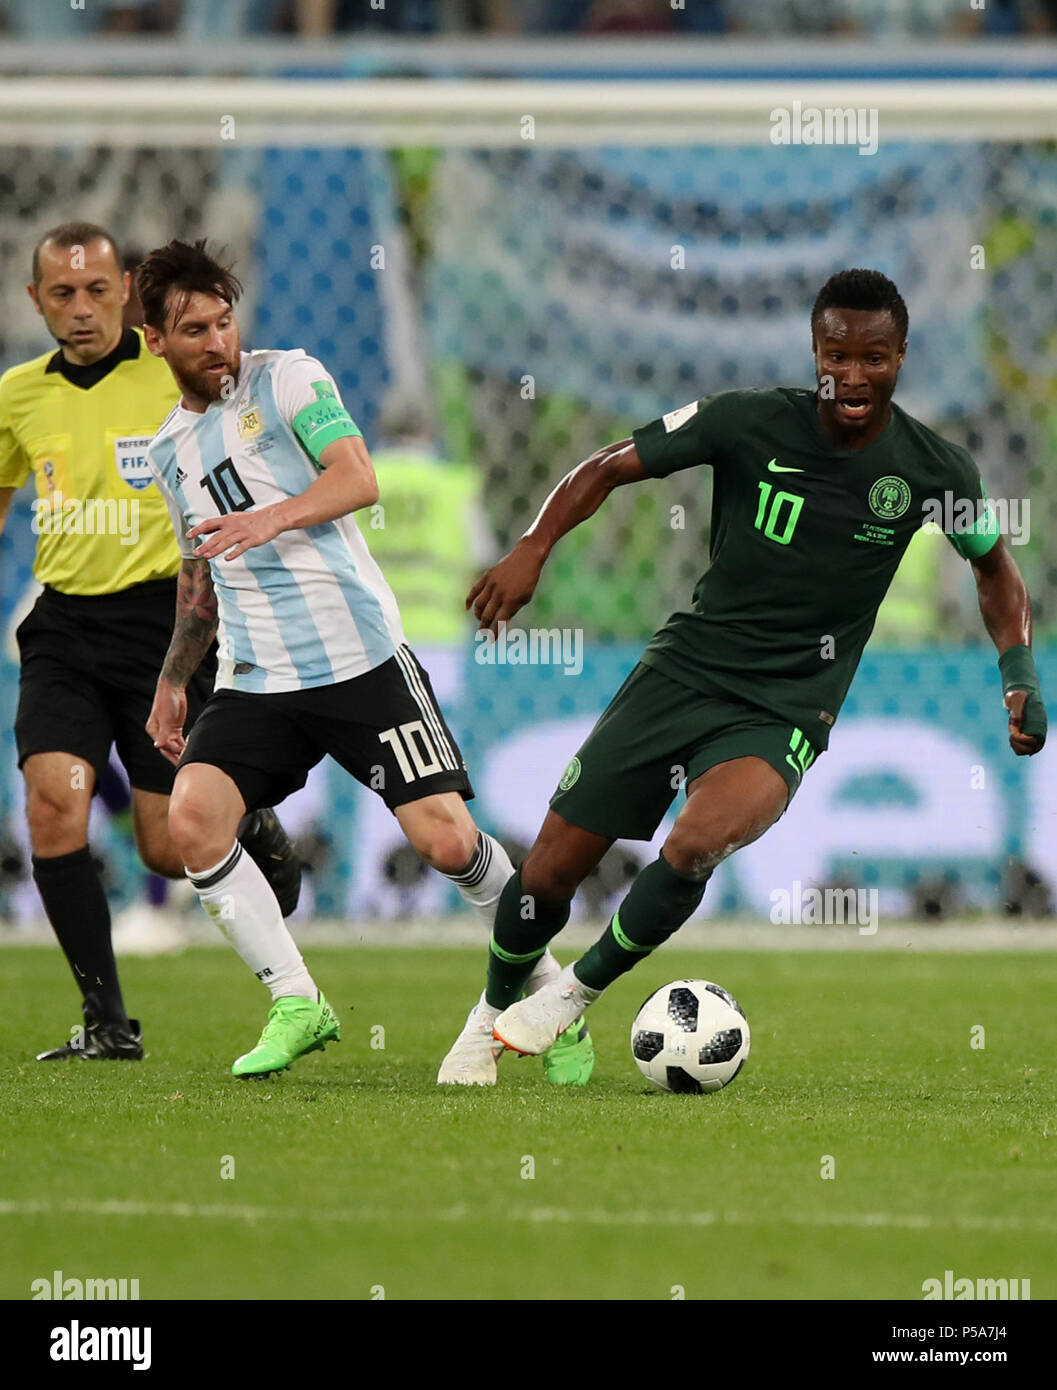 Saint Petersburg, Russia. 26th June, 2018. John Obi Mikel (R) of Nigeria vies with Lionel Messi (C) of Argentina during the 2018 FIFA World Cup Group D match between Nigeria and Argentina in Saint Petersburg, Russia, June 26, 2018. Credit: Wu Zhuang/Xinhua/Alamy Live News Stock Photo